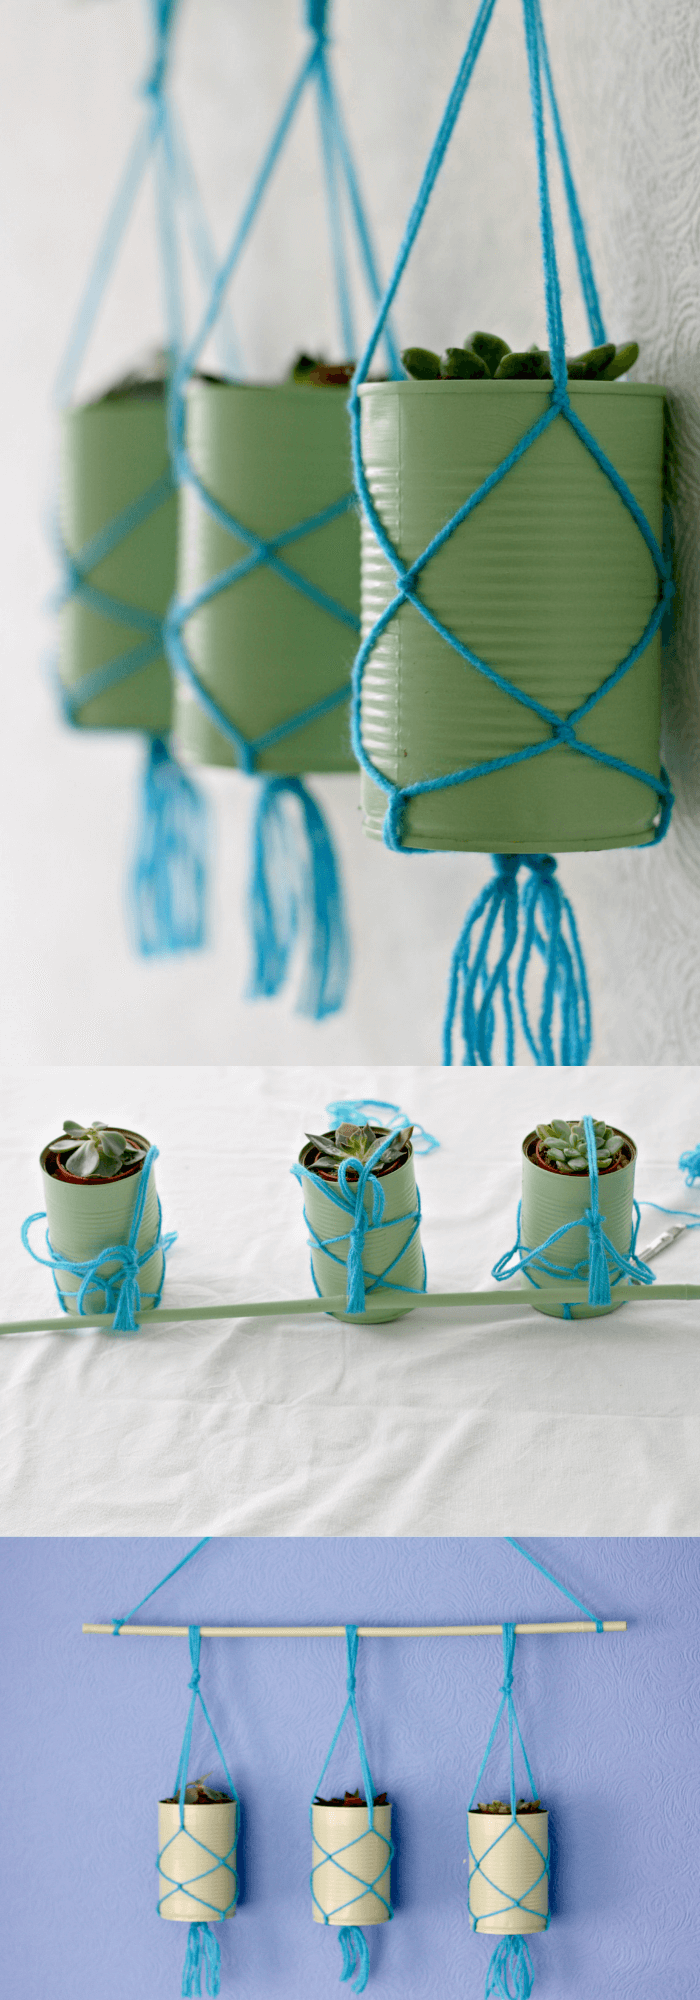 Tin can hanging planters